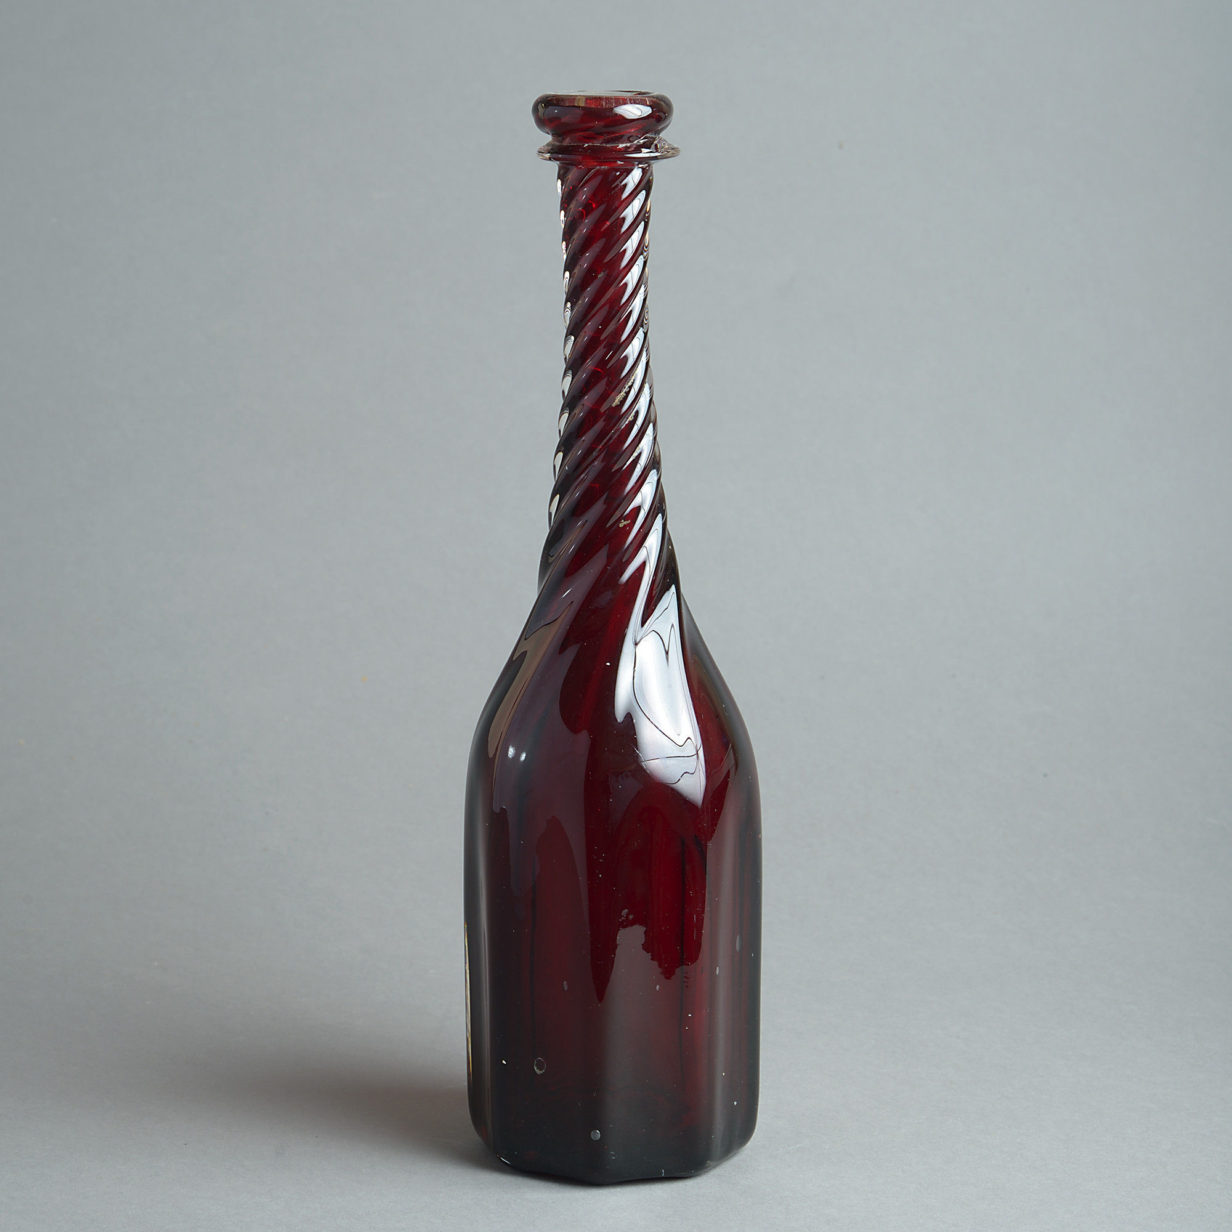 Mid-19th century red wrythen glass bottle